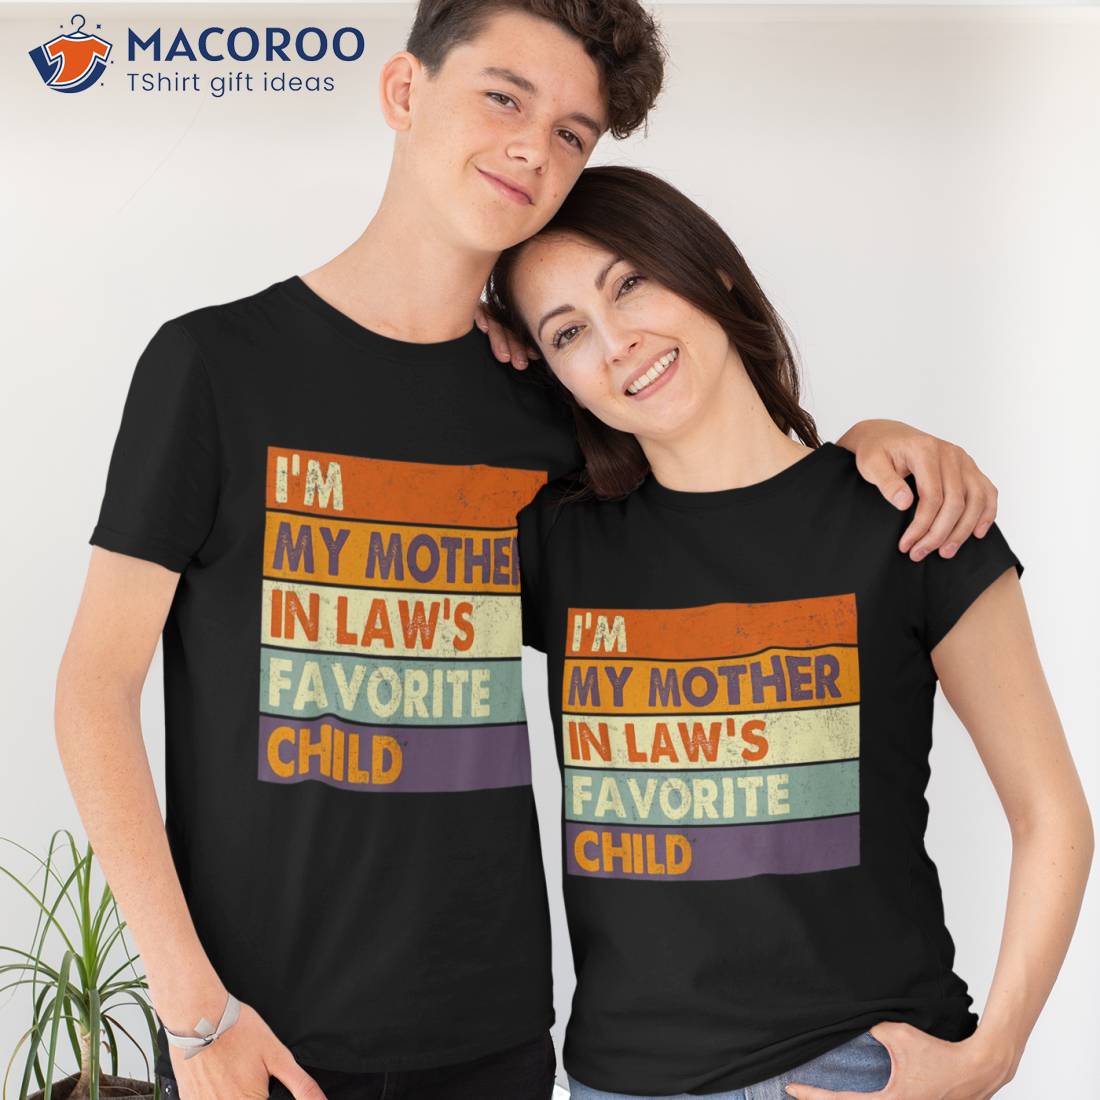 https://images.macoroo.com/wp-content/uploads/2023/05/i-m-my-mother-in-laws-favorite-child-family-mothers-day-gift-shirt-tshirt.jpg